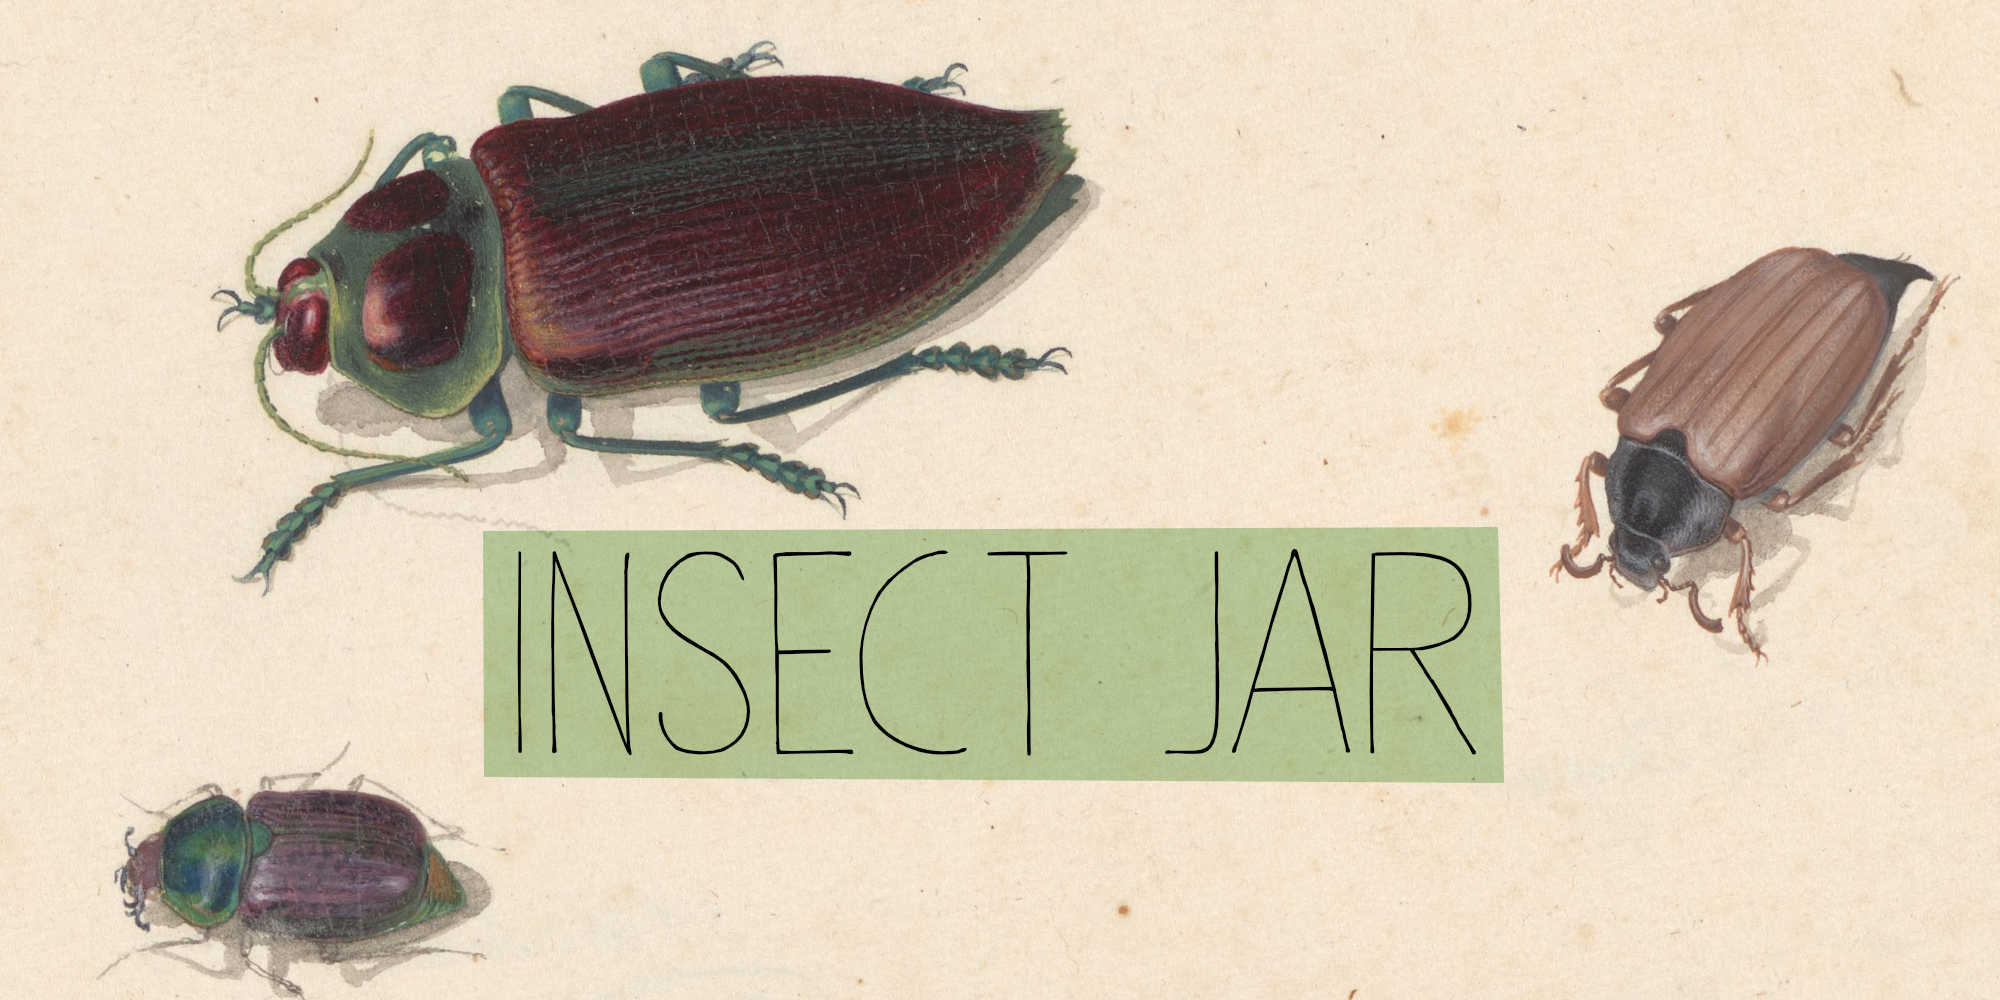 Insect Jar